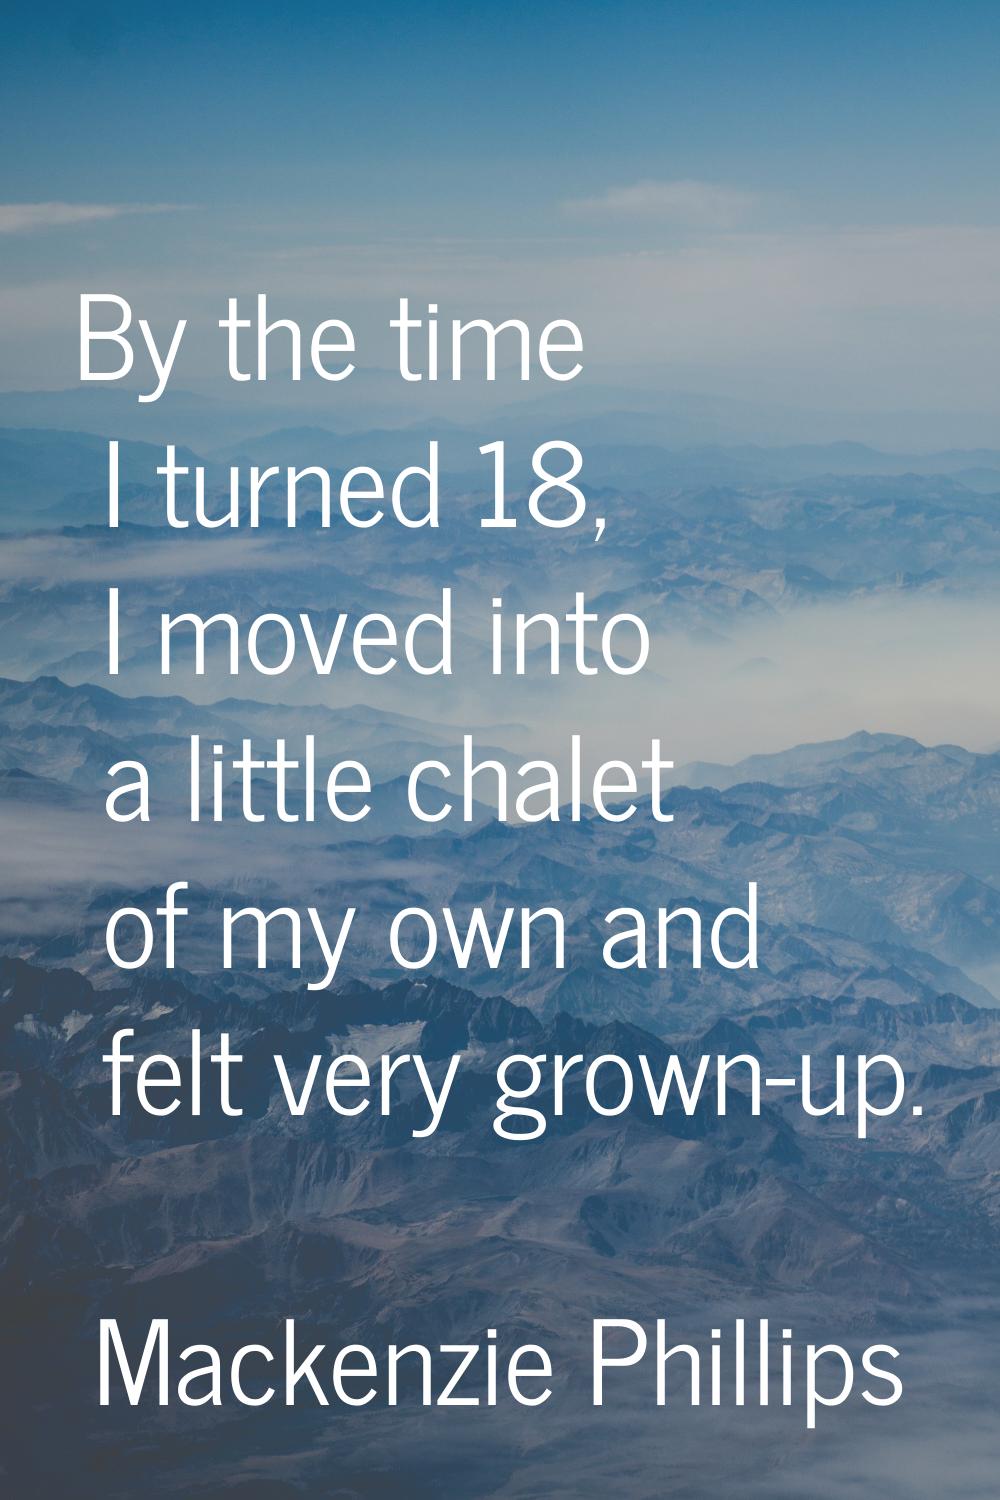 By the time I turned 18, I moved into a little chalet of my own and felt very grown-up.